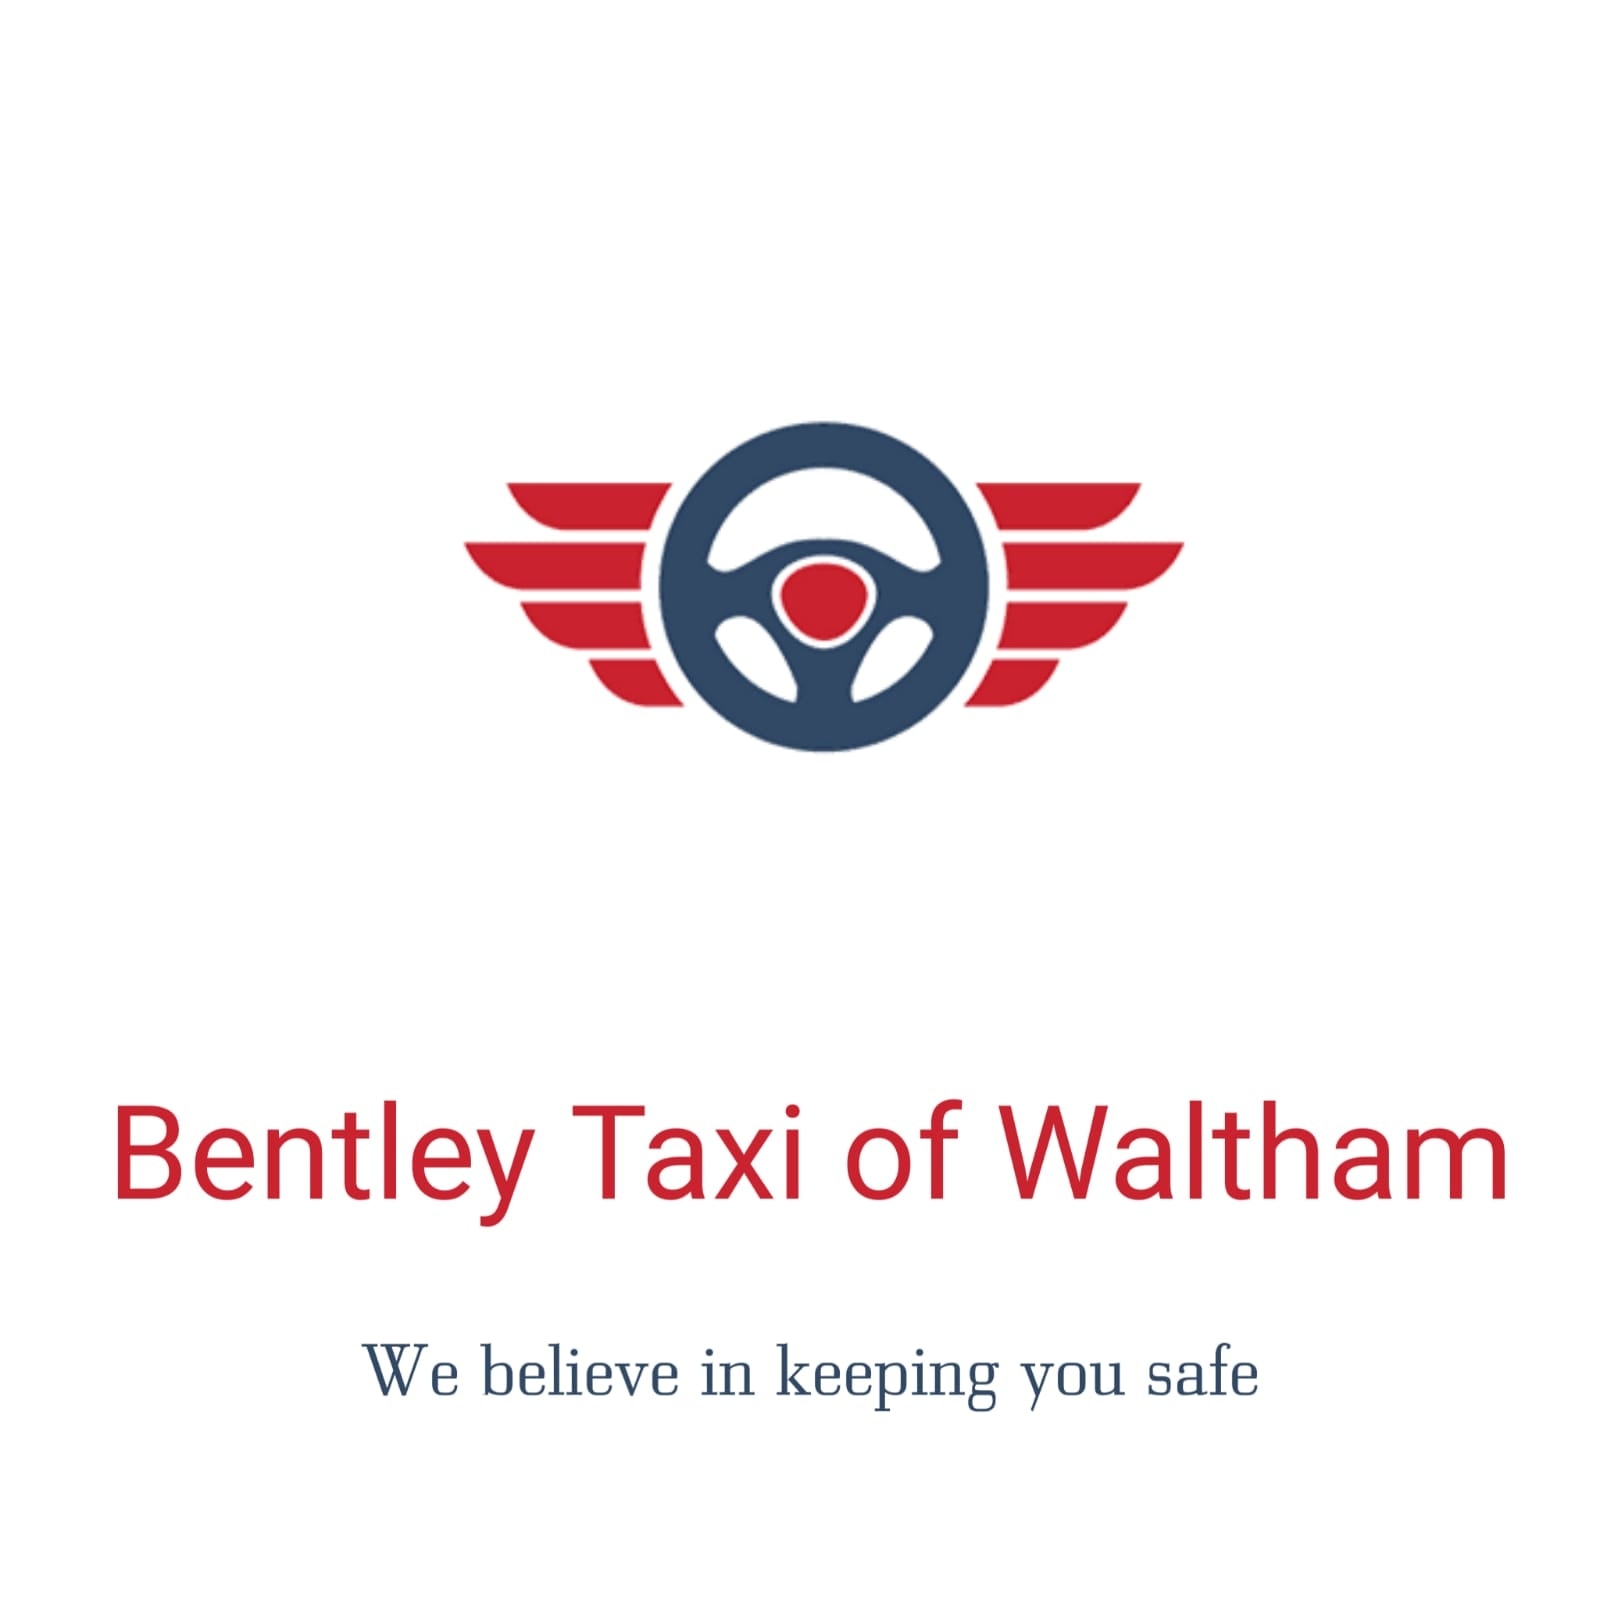 Business logo of Waltham taxi